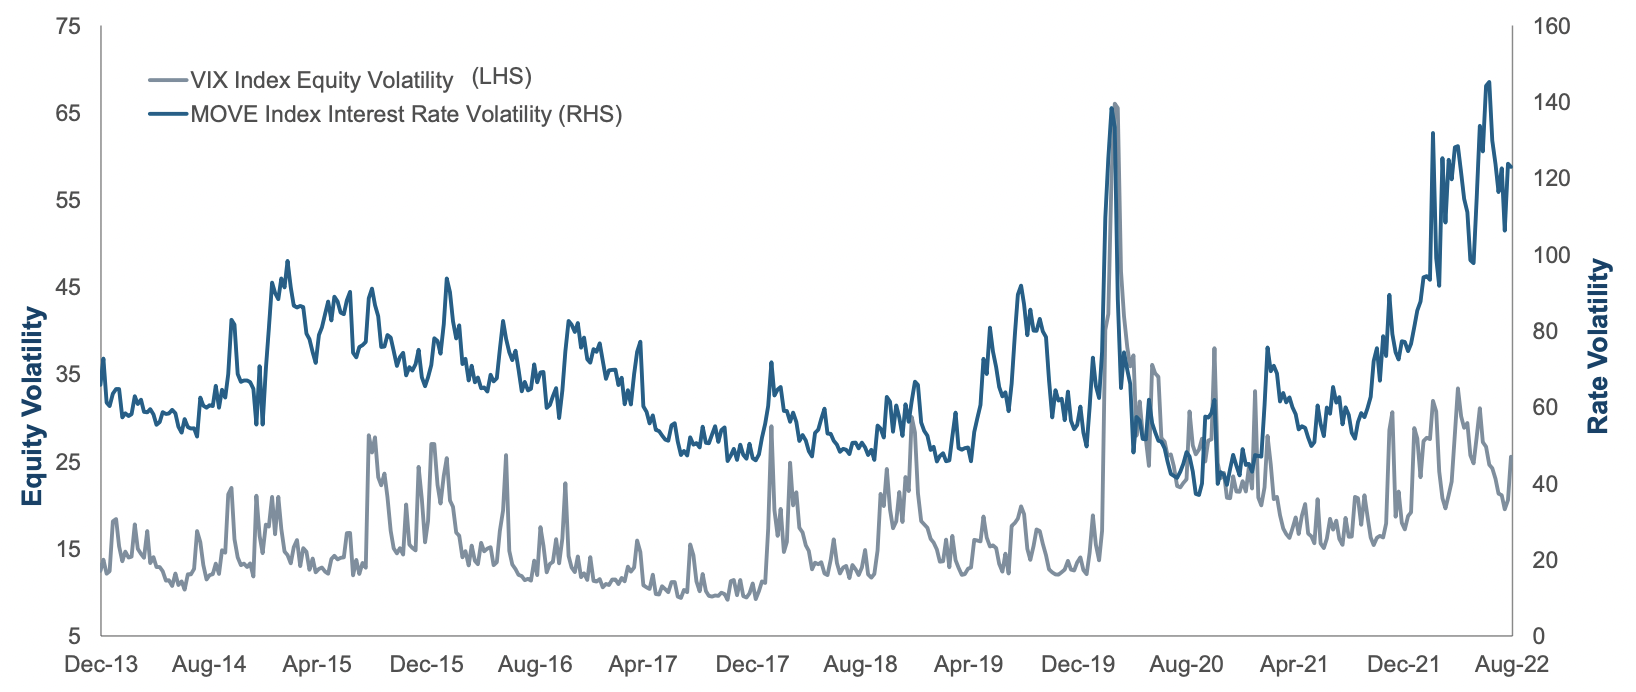 Volatility is the gift that has been given in spades this year. (Source: T. Rowe Price)